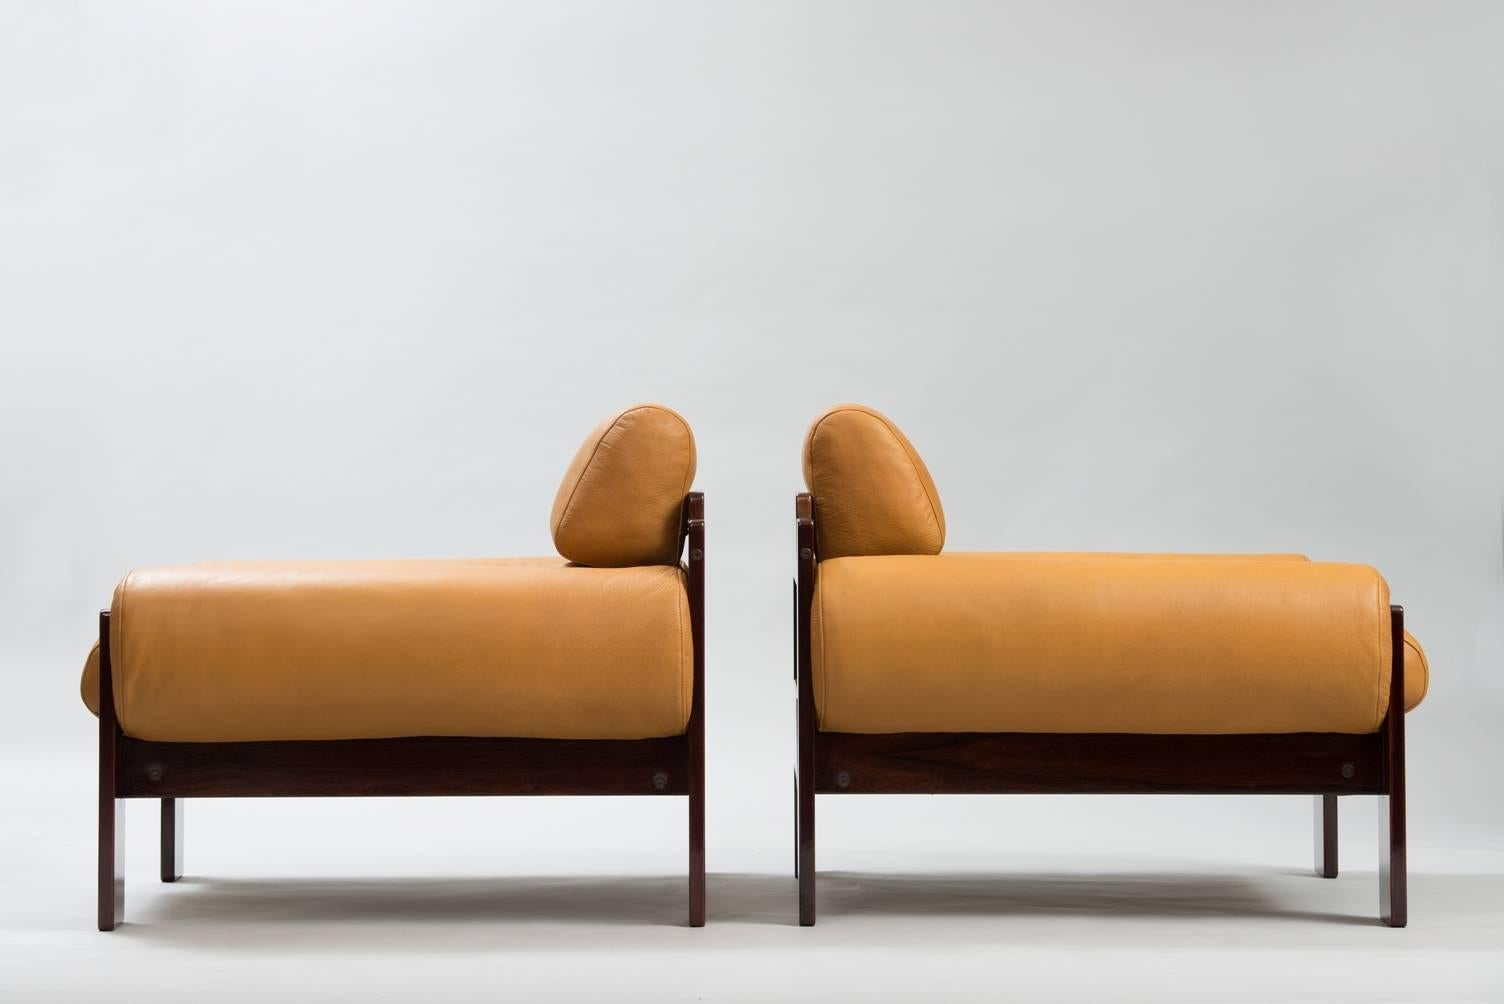 A pair of rosewood armchairs re-upholstered natural waxed leather.